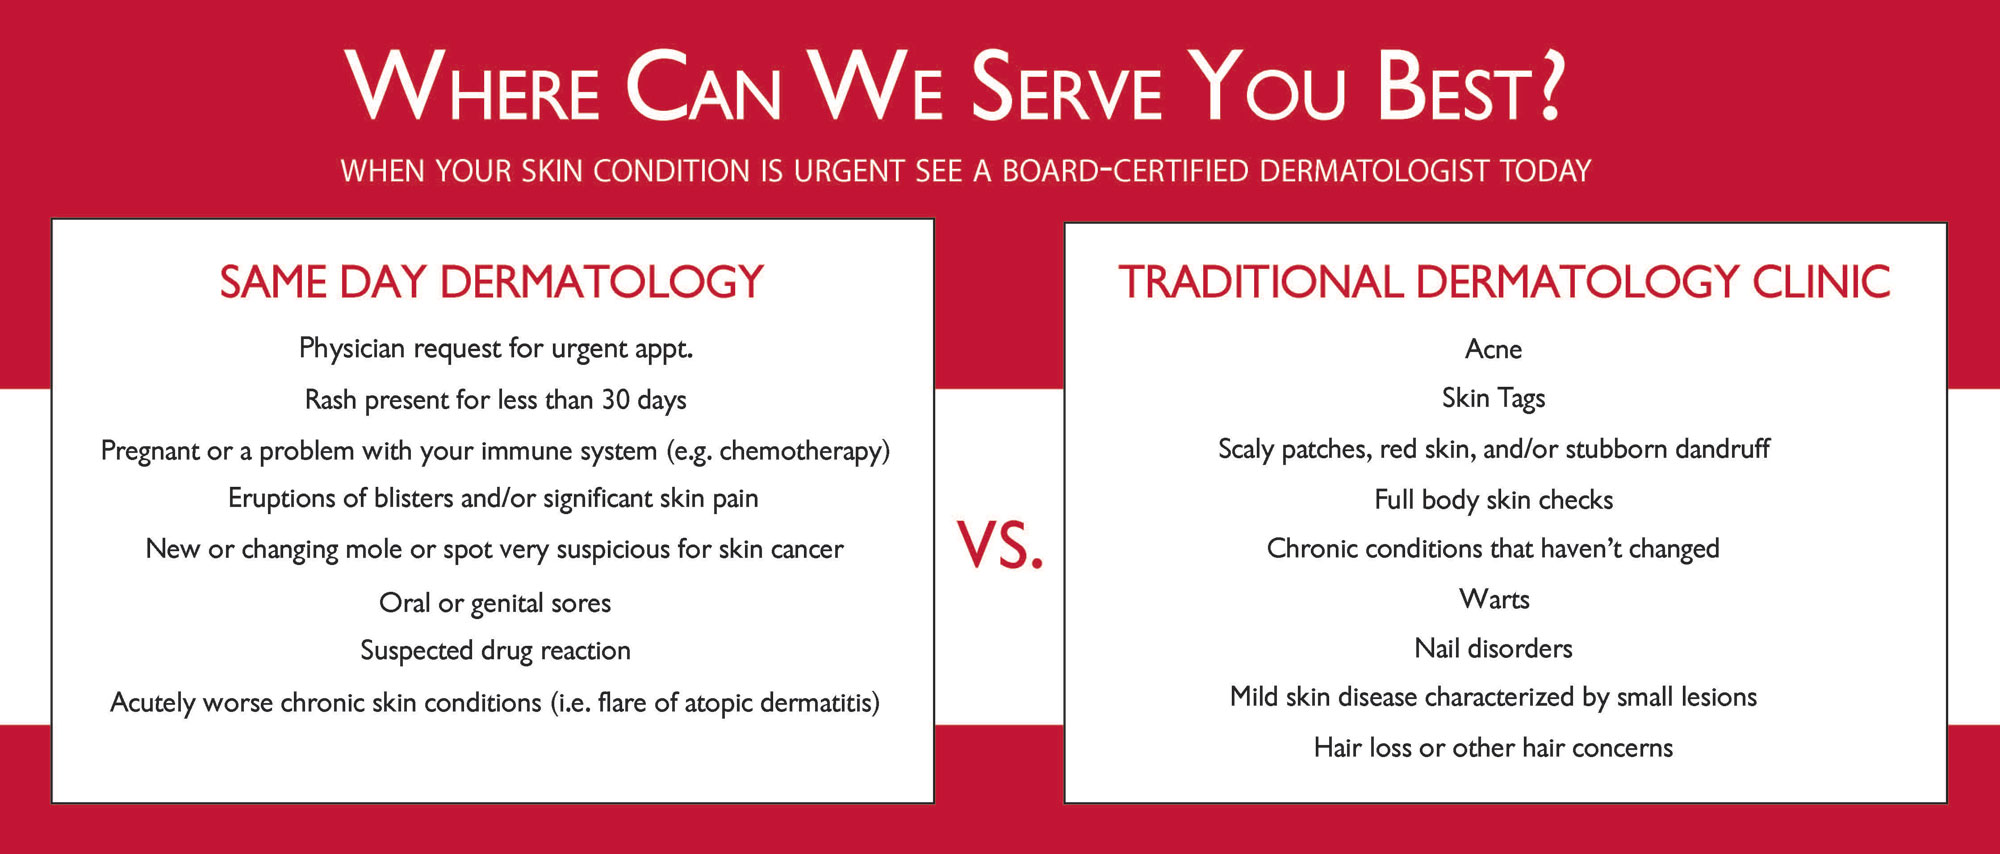 Conditions that we see in the same day dermatology clinic: Rashes, blisters, bleeding moles, sores, and other general dermatology conditions